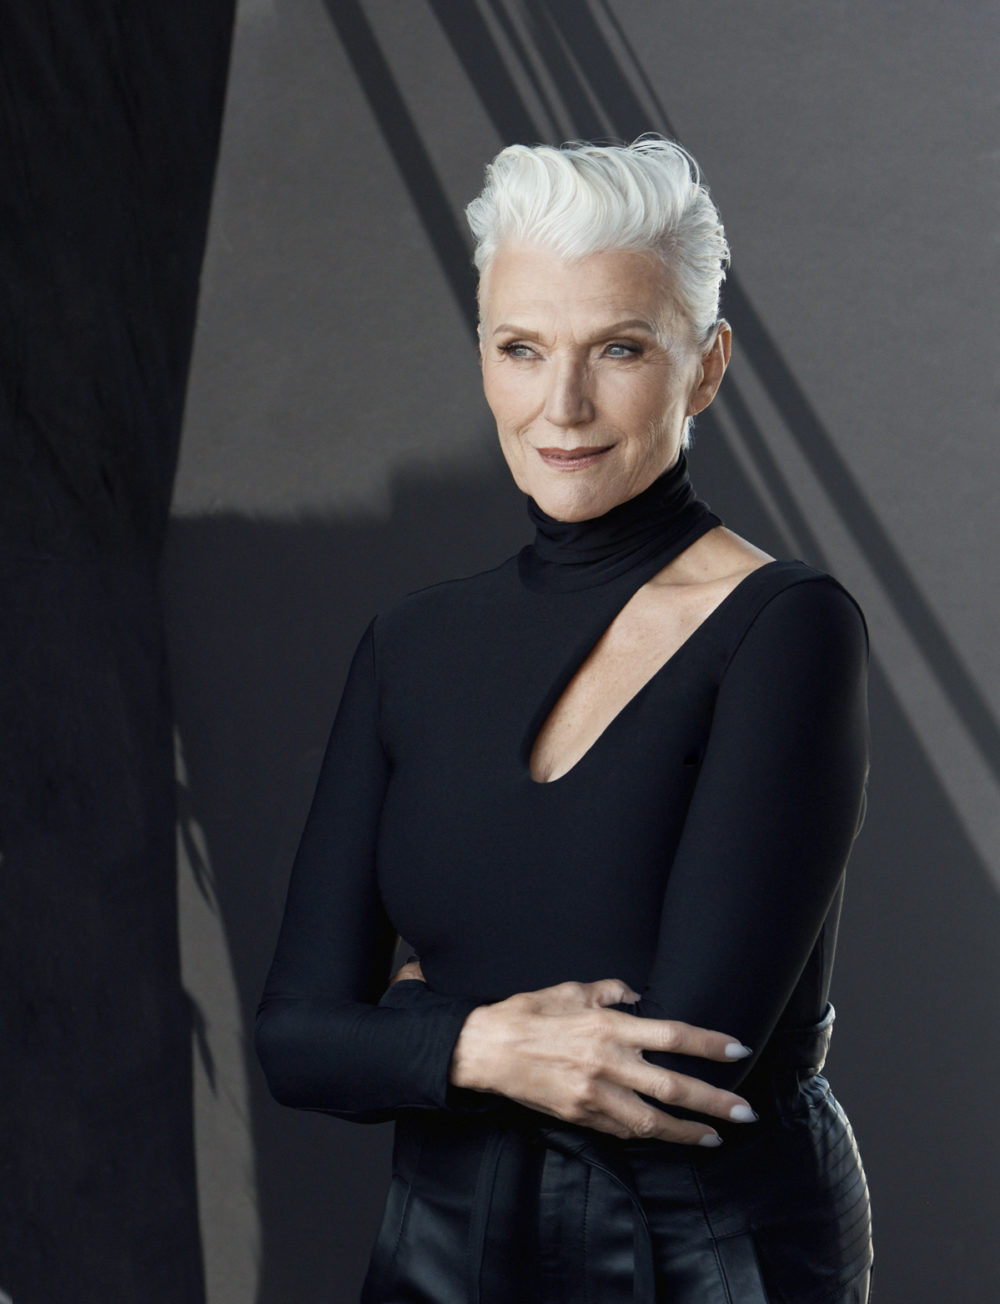 Maye Musk, the 69-year-old model, is